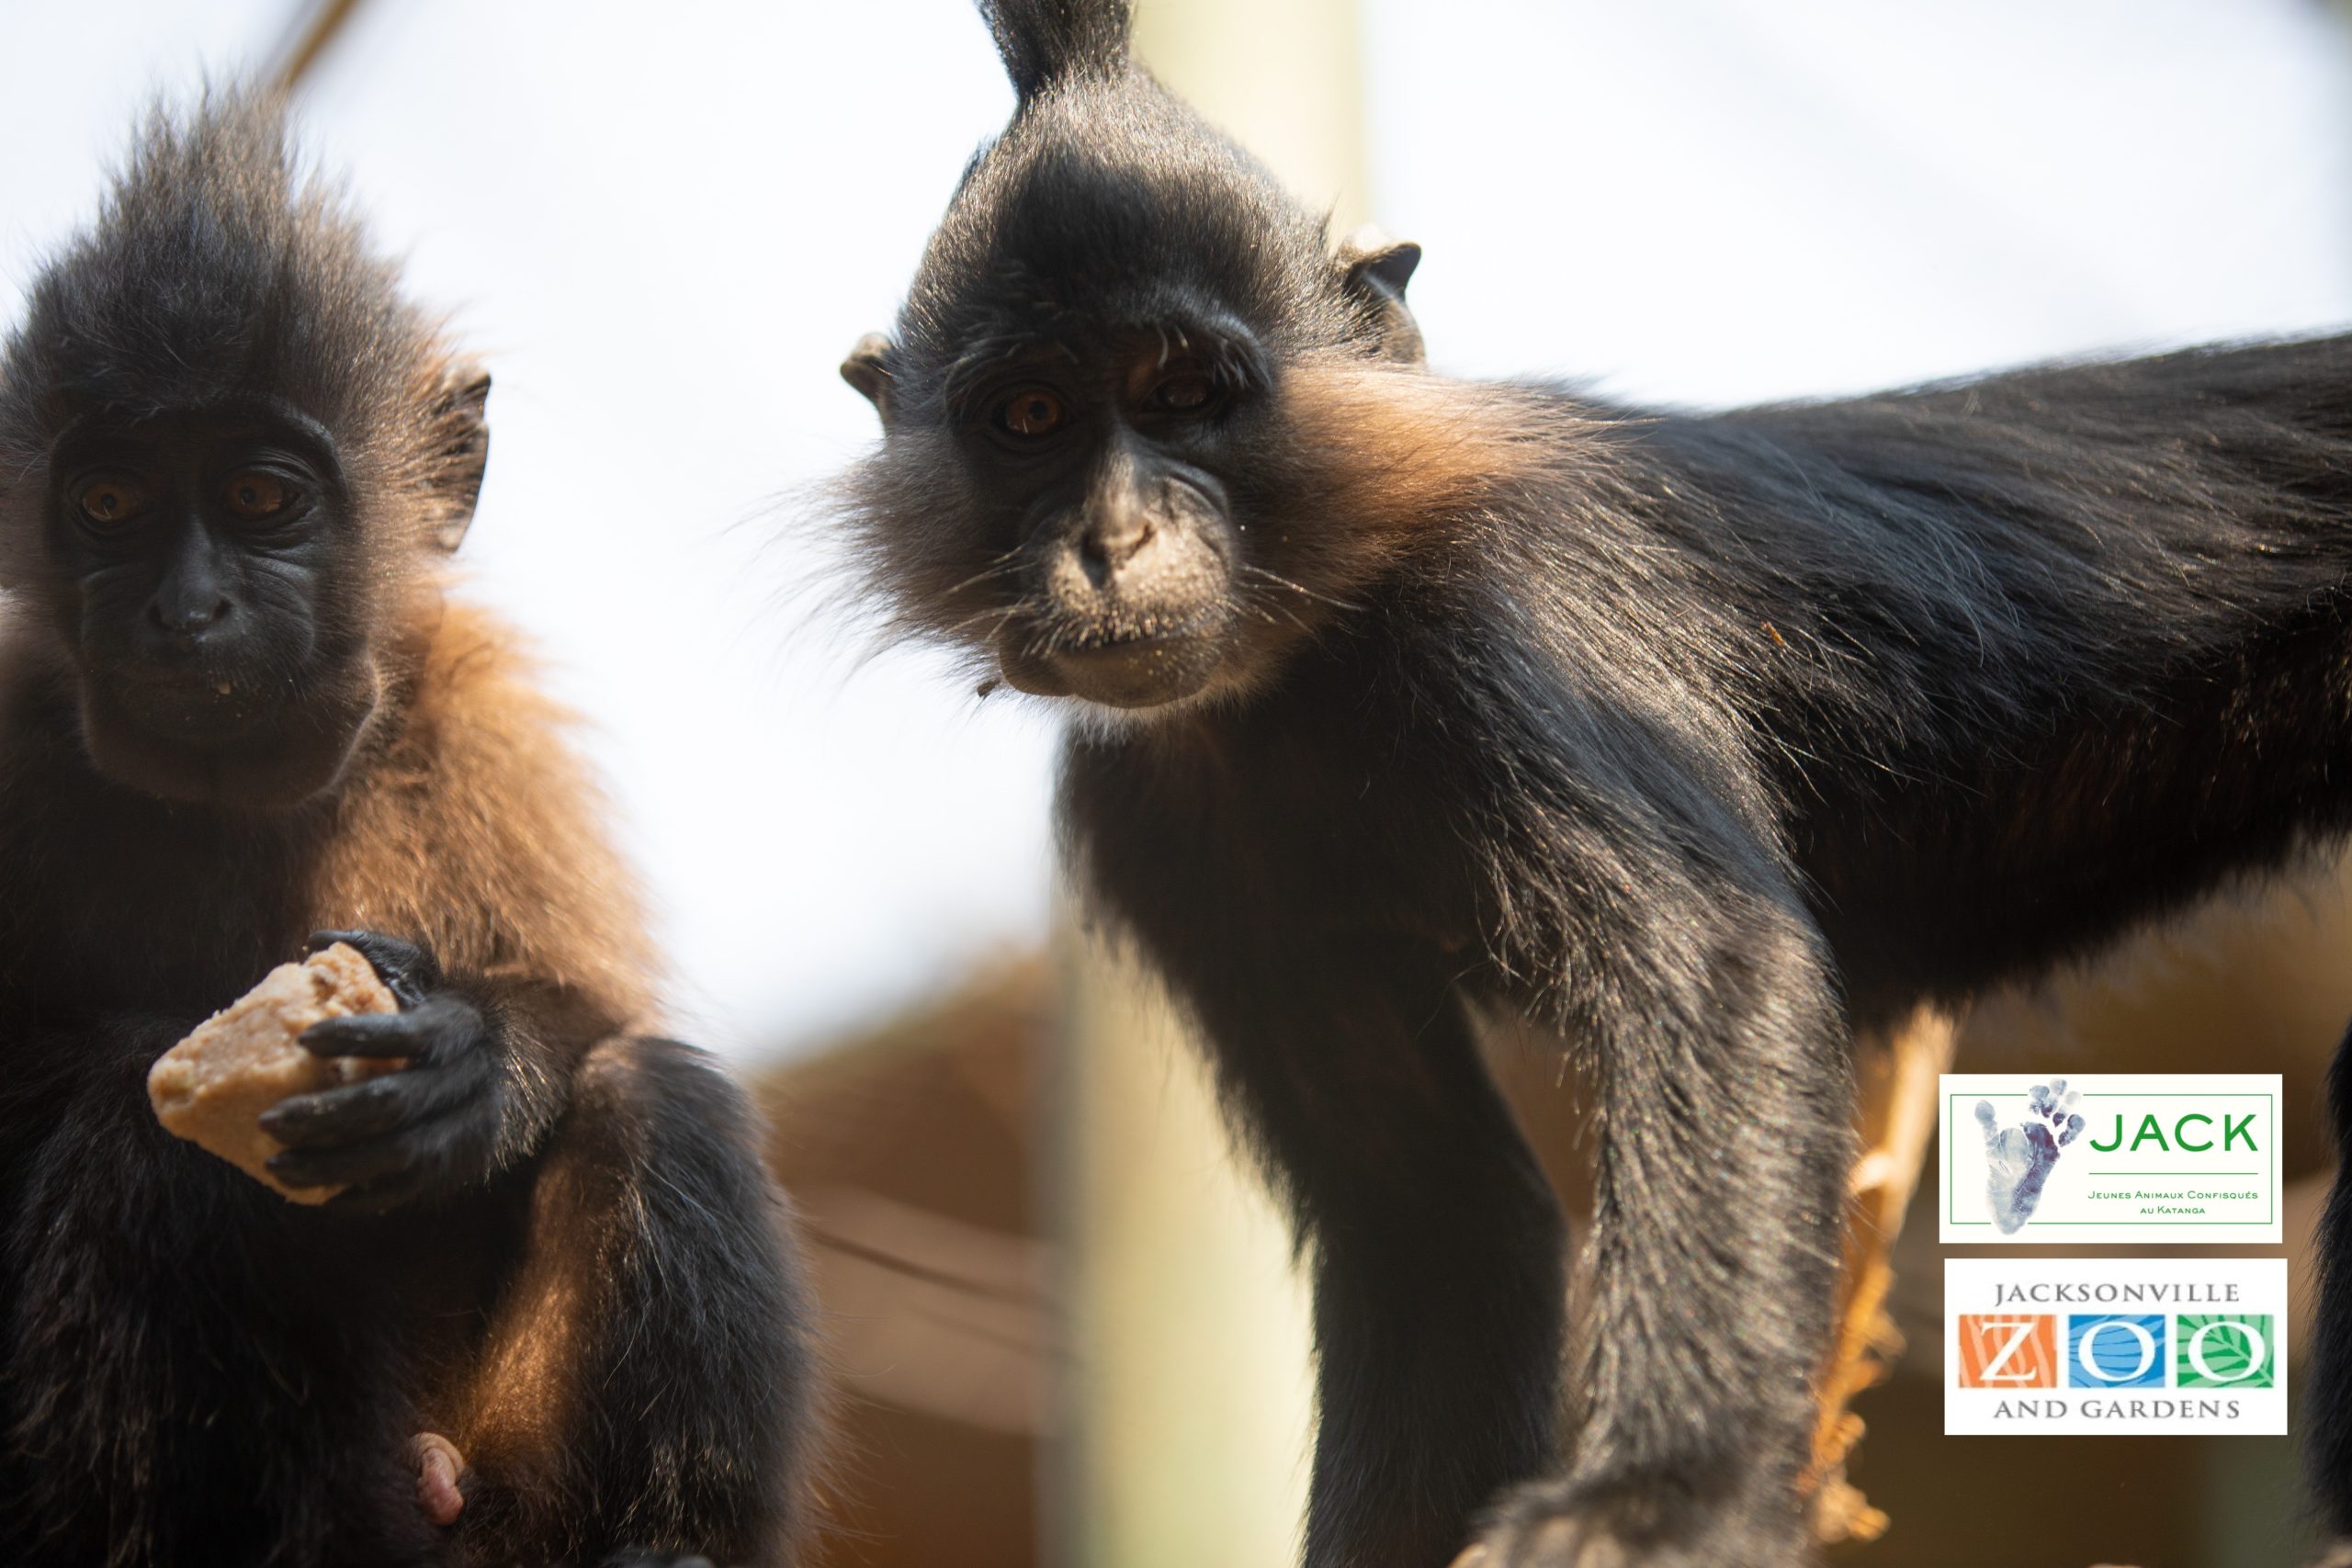 Thanks to JACKSONVILLE ZOO & GARDENS for the building of a nursery for young primates